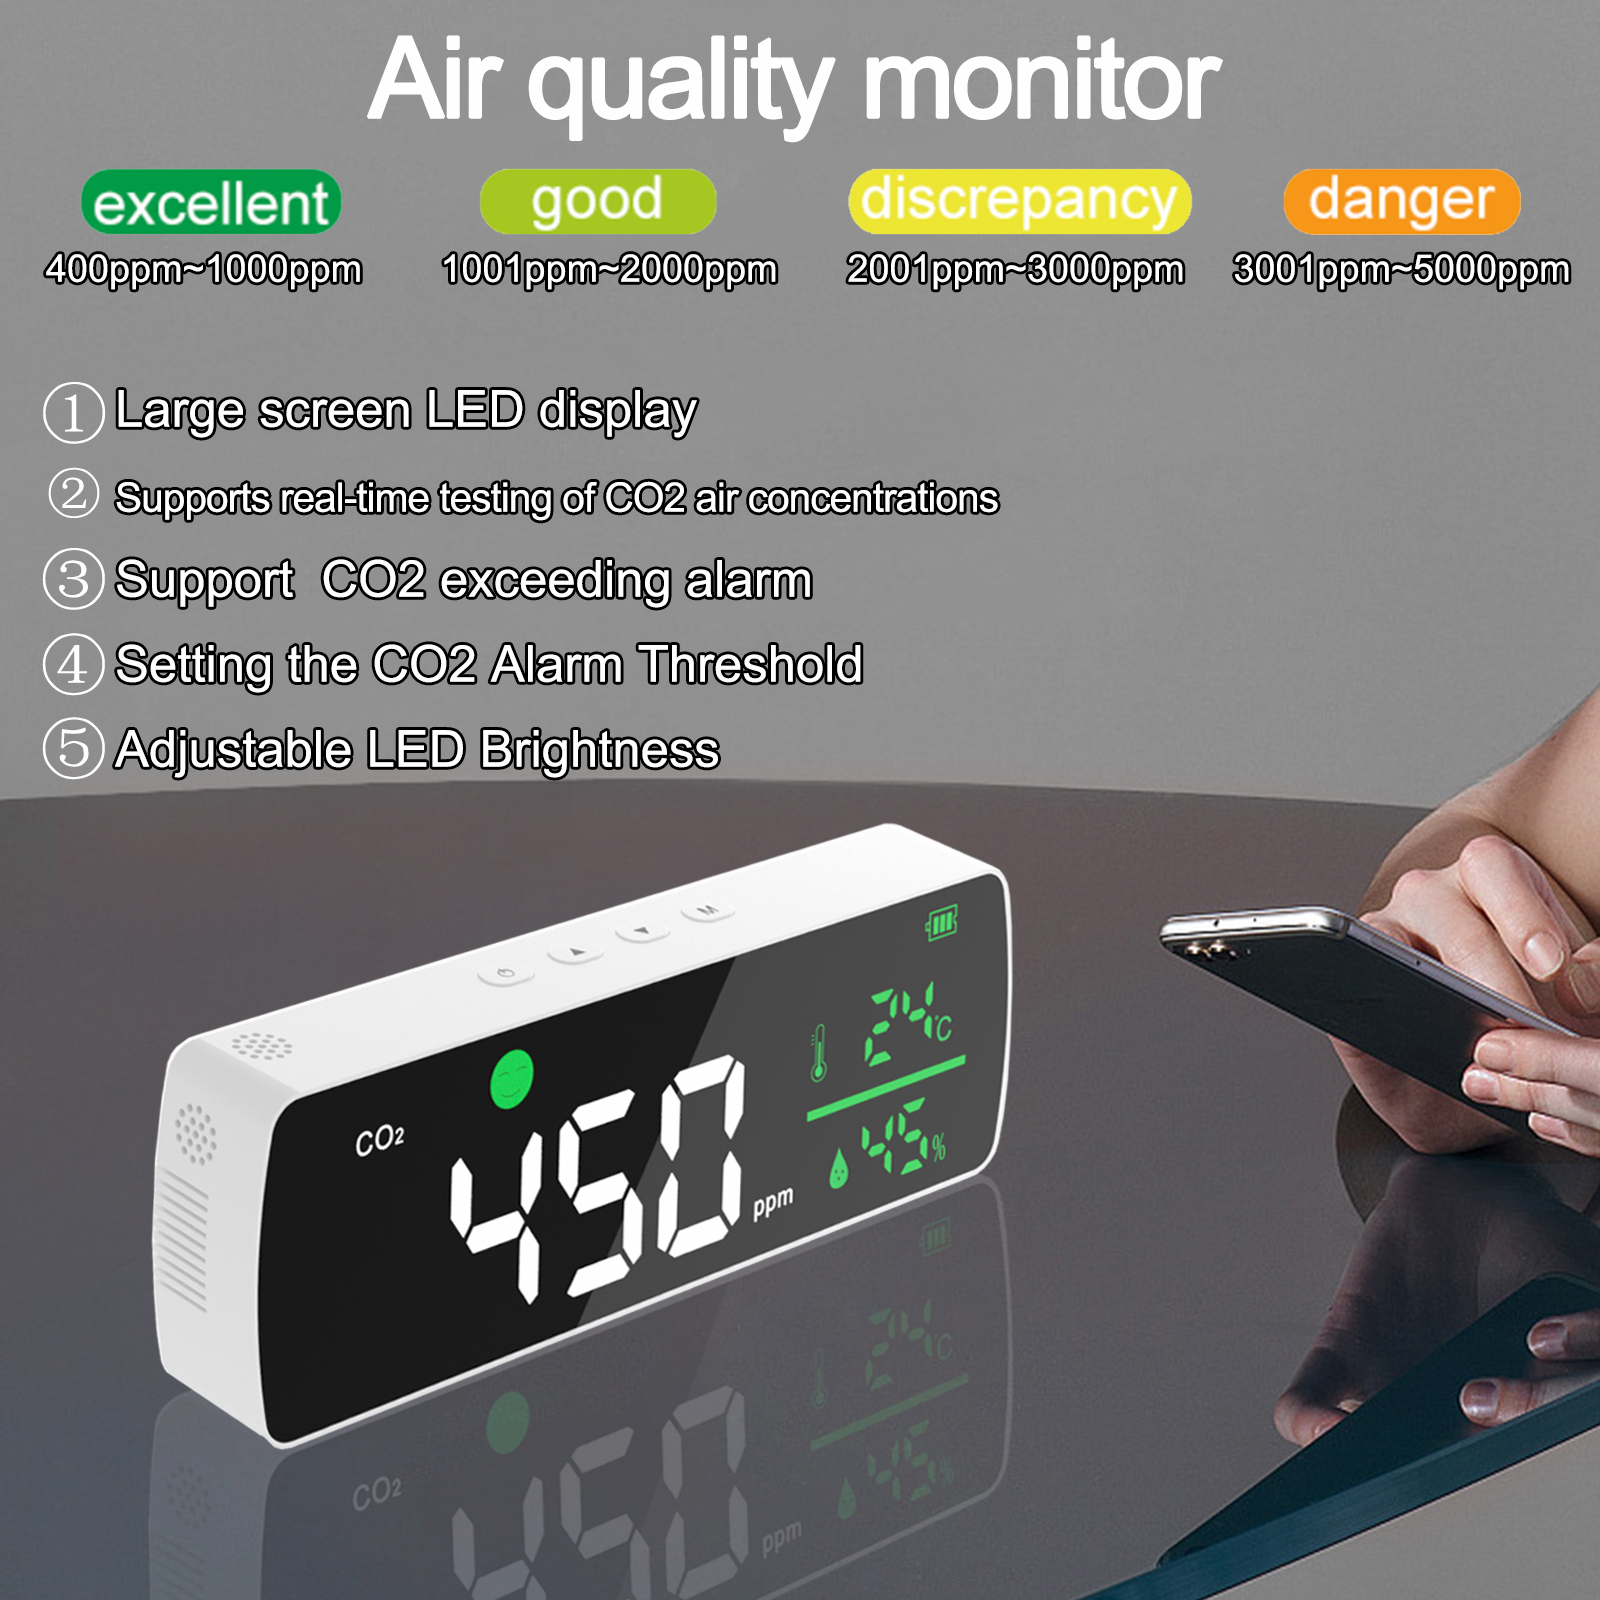 11-Inch-Large-Screen-CO2-Tester-Carbon-Dioxide-Temperature-and-Humidity-Meter-Air-Quality-Monitor-Ga-1932844-1